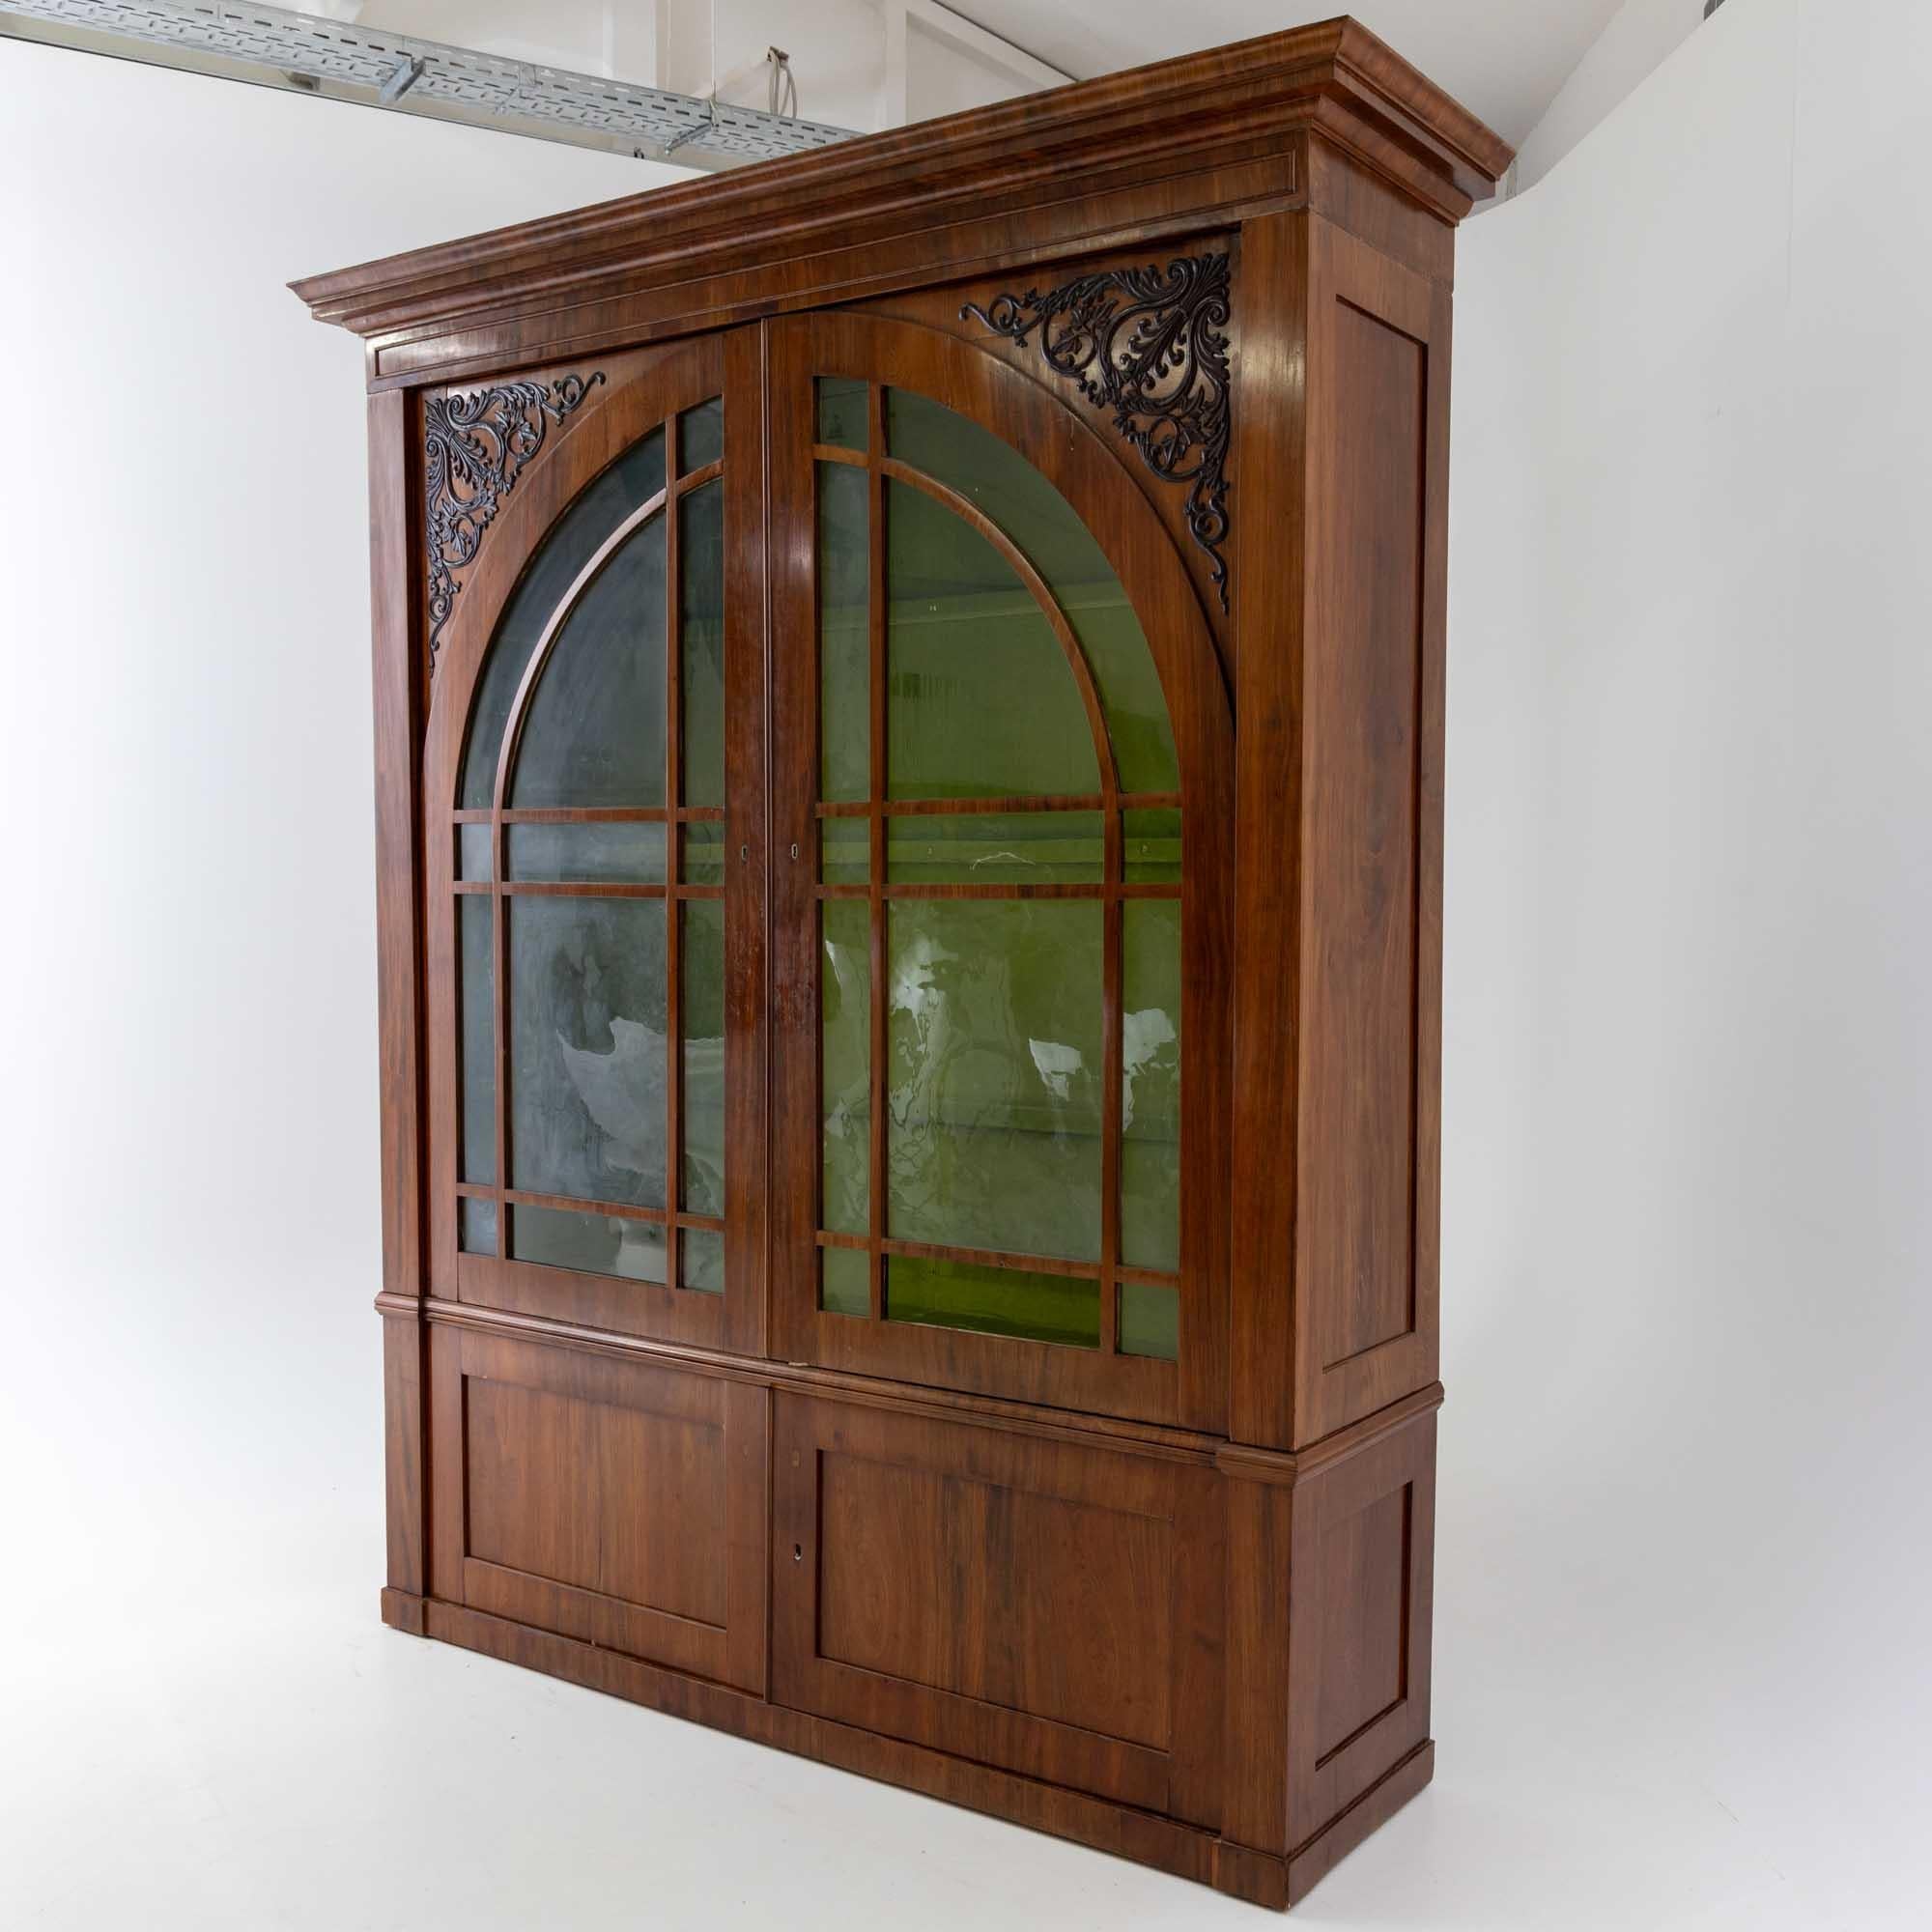 Large library cabinet with a two-door lower section and a two-door upper section with glazed and arched doors and carved vine decoration in the spandrels. The cornice is profiled several times. The inside of the cabinet is painted green and fitted